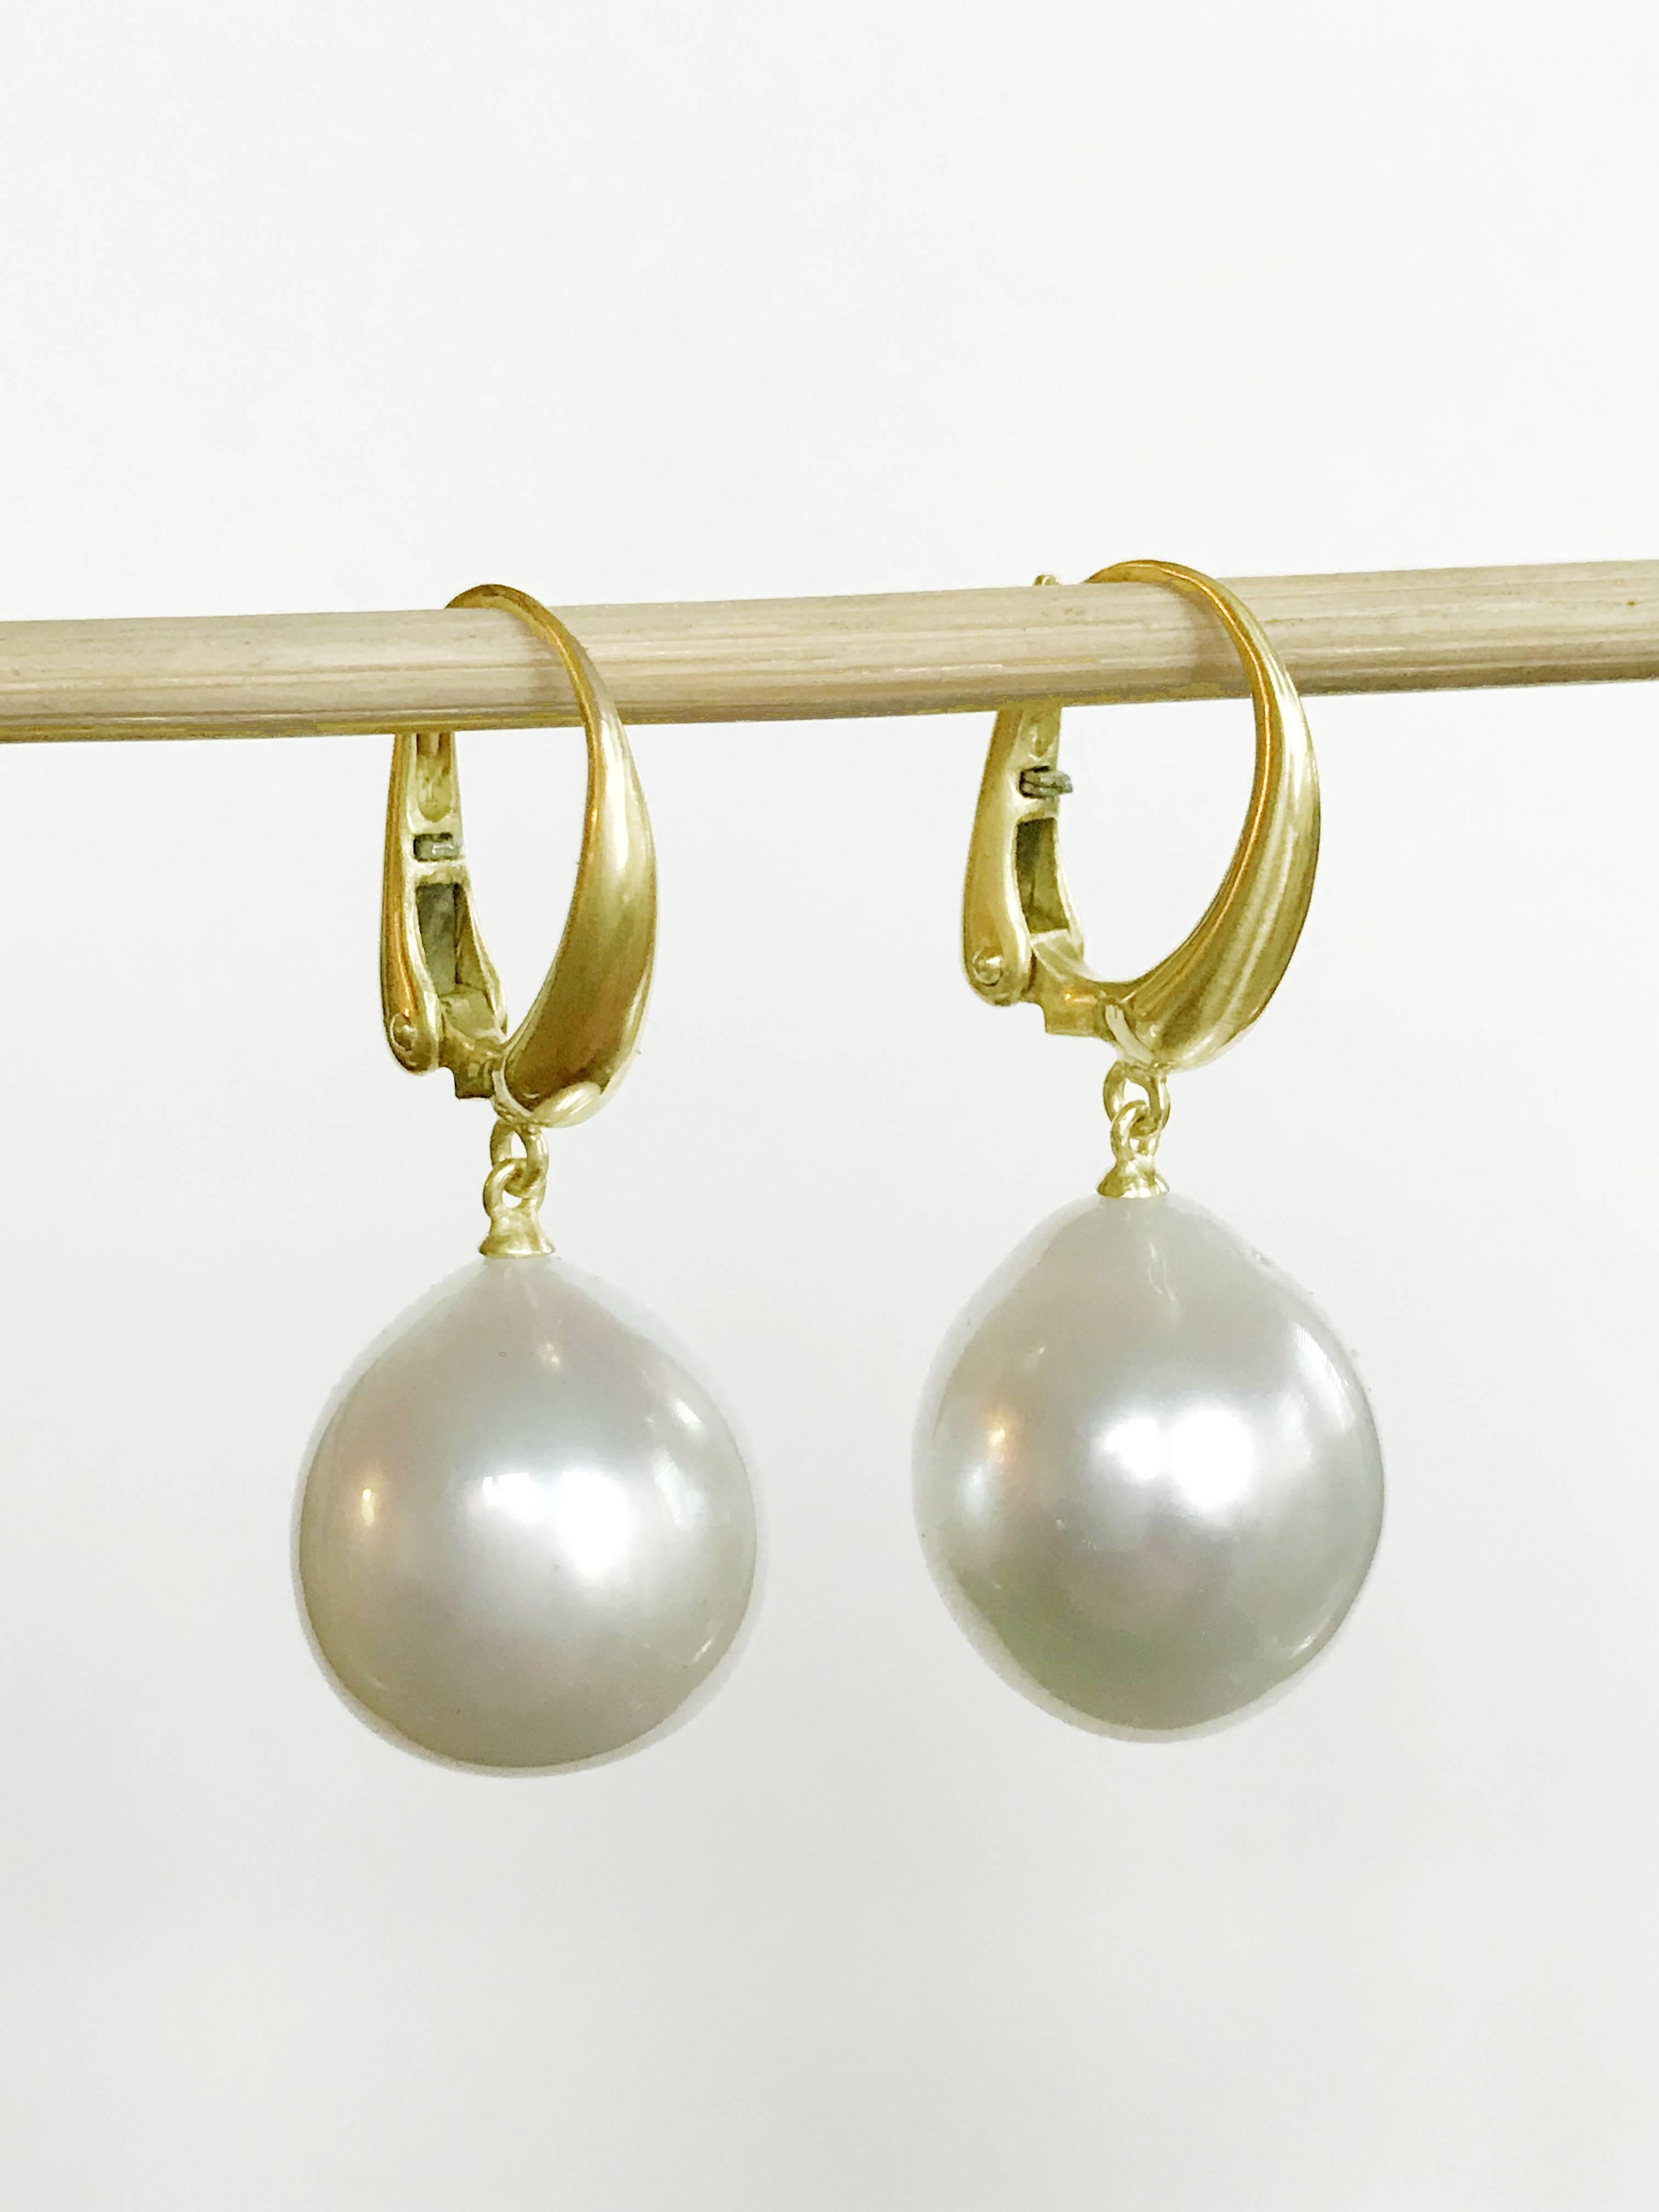 Dalben design 18 kt semi-lucid finished yellow gold earrings with two lightly drop-shape South Sea pearls of 13 x 14 mm circa weight 32,9 carat . 
Earring dimension :  
width 13 mm 
height with leverback 31 mm  
The earrings has been designed and